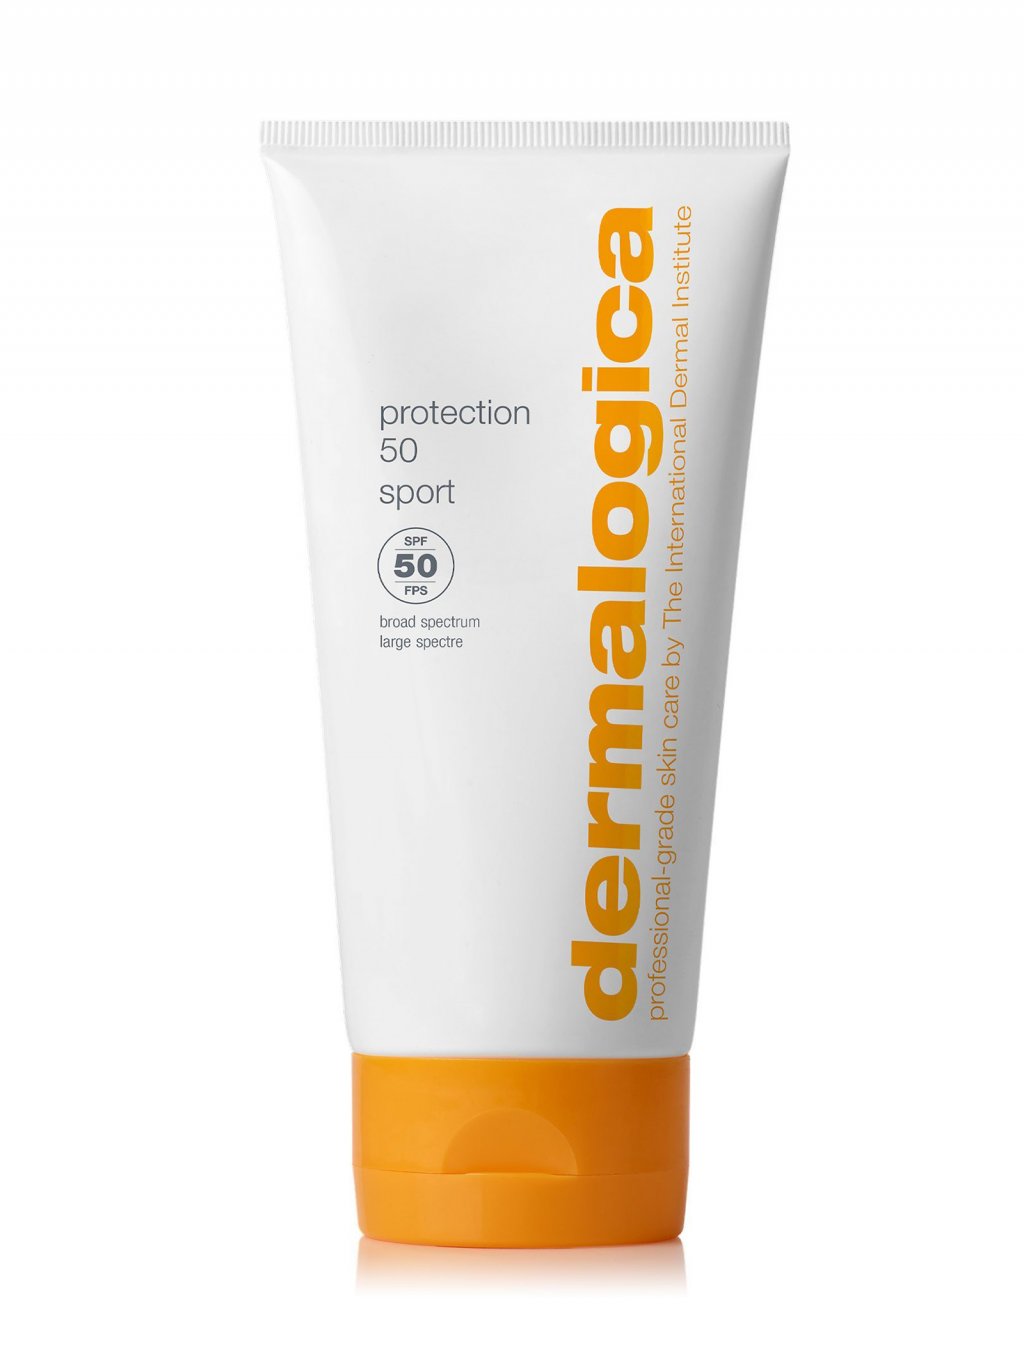 protection 50 sport SPF50, 156 ml